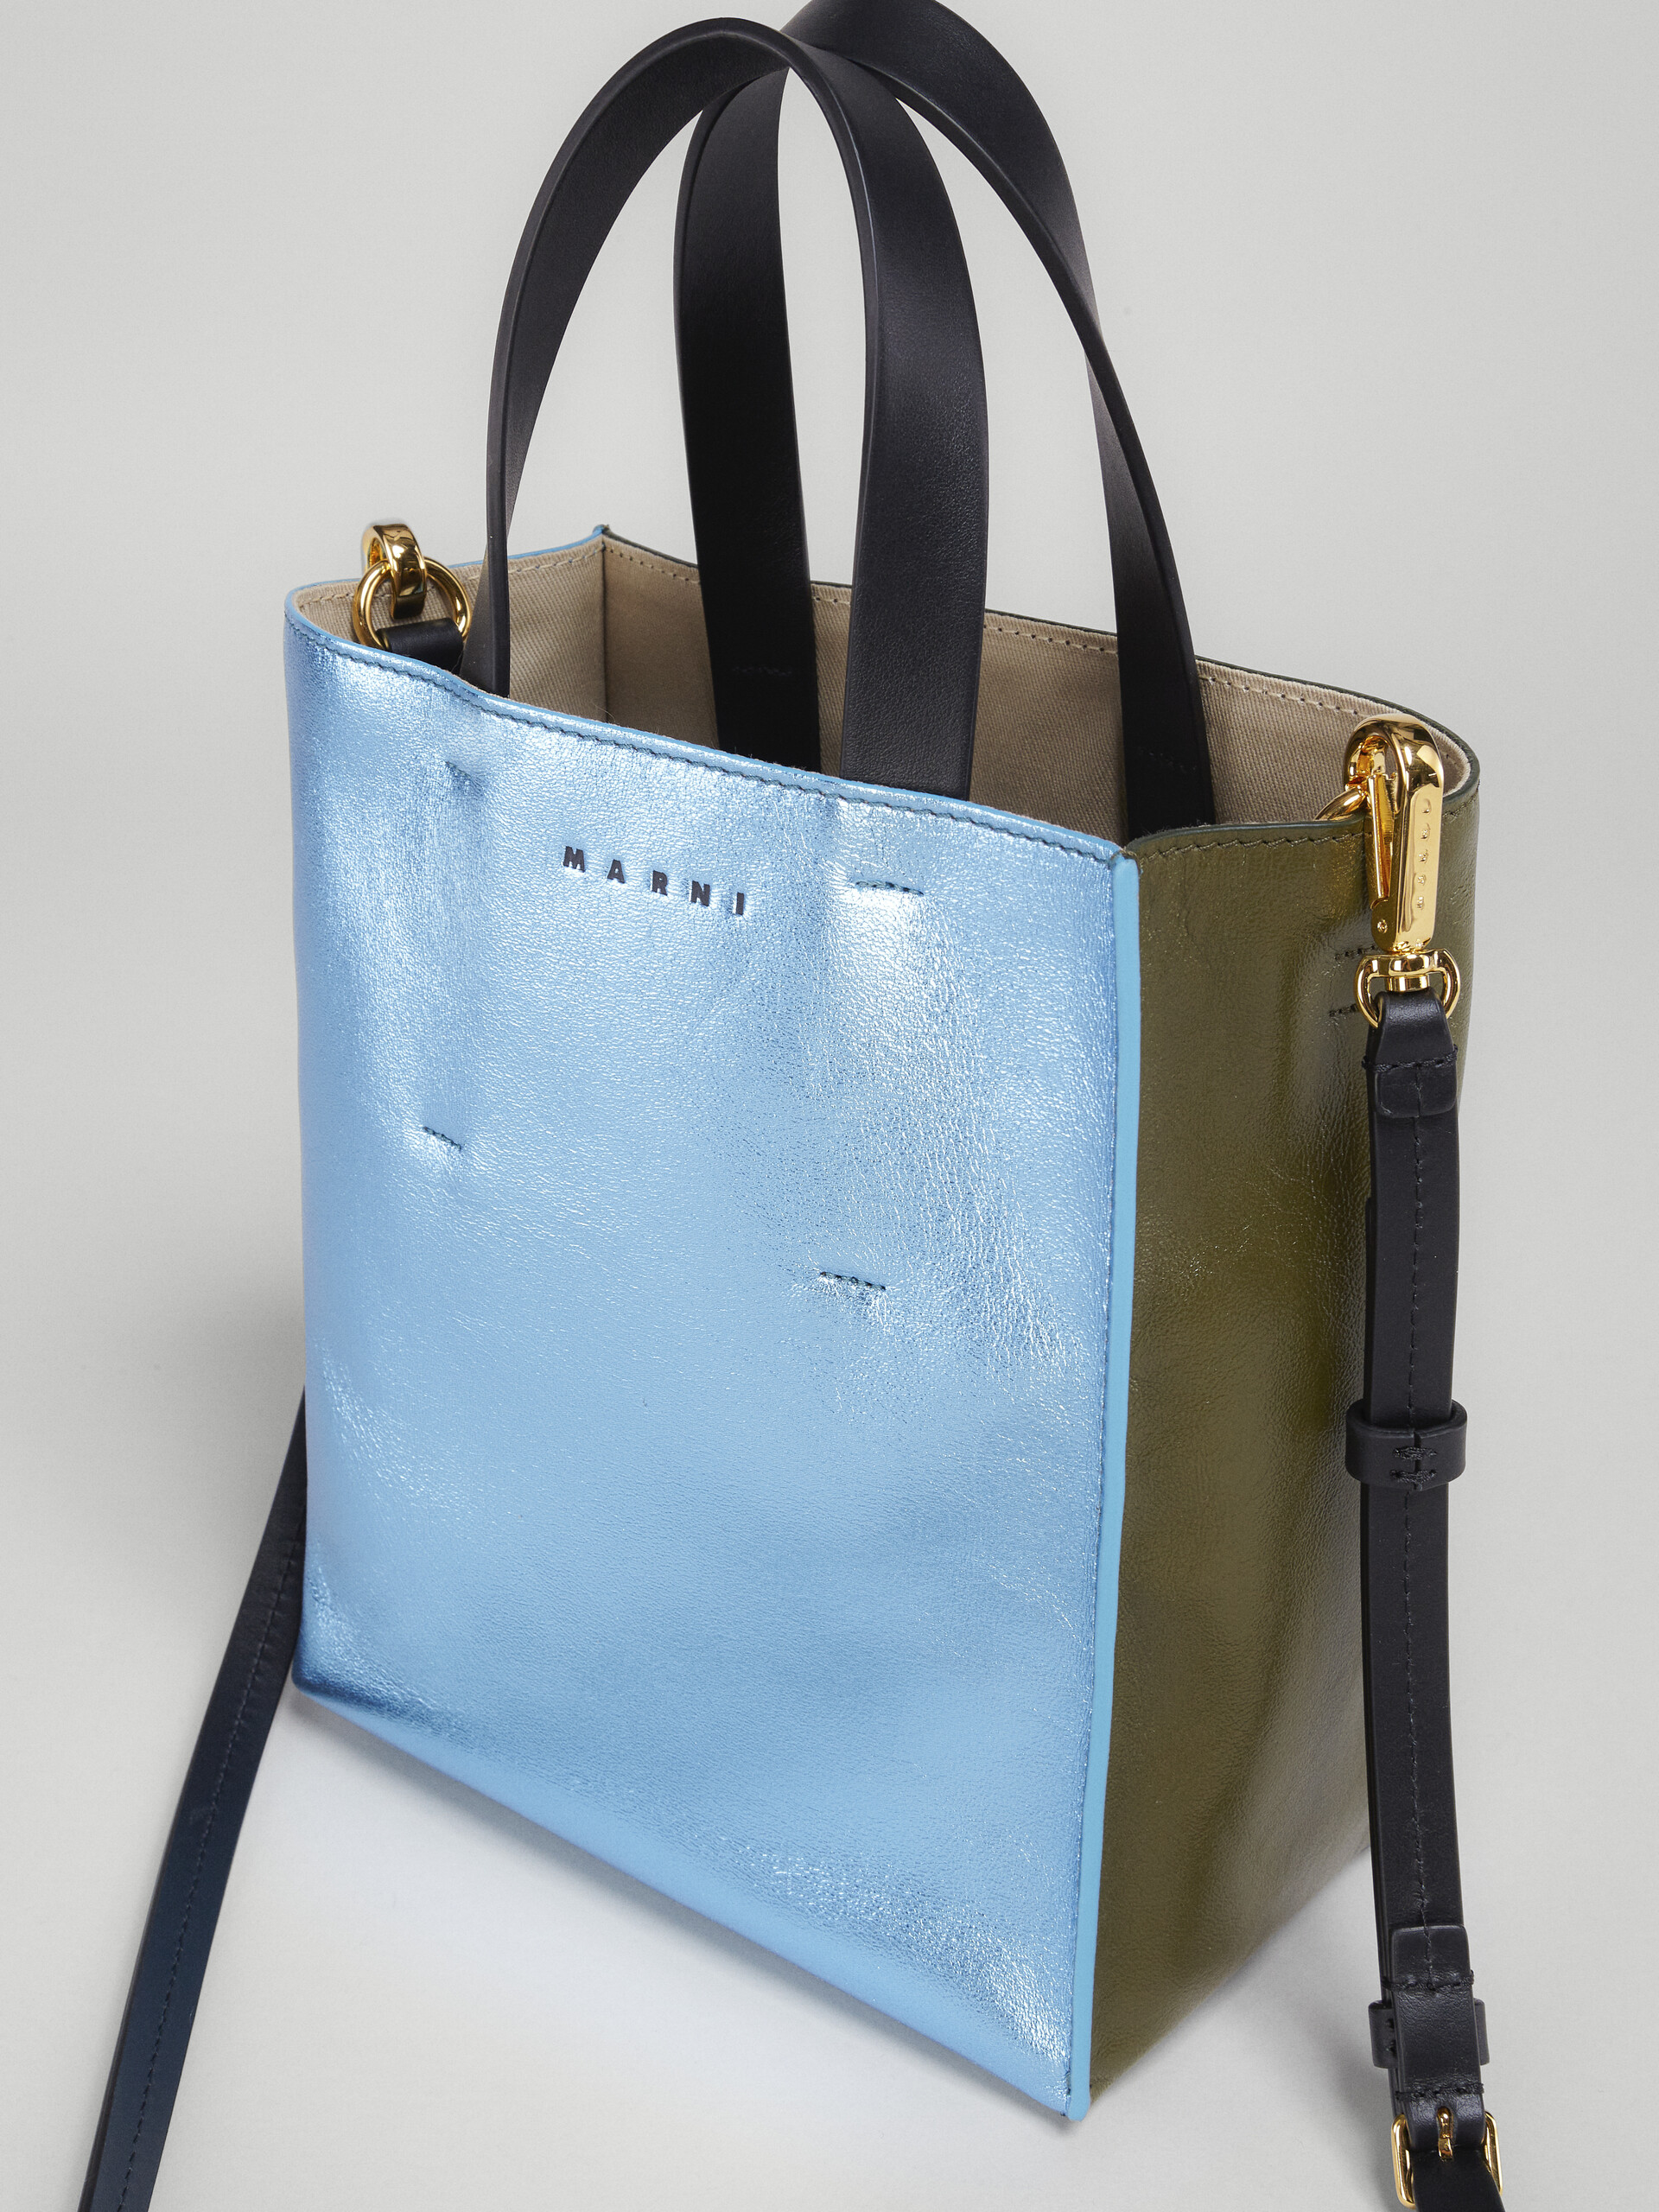 MUSEO mini bag in pale blue and green metallic leather - Shopping Bags - Image 3